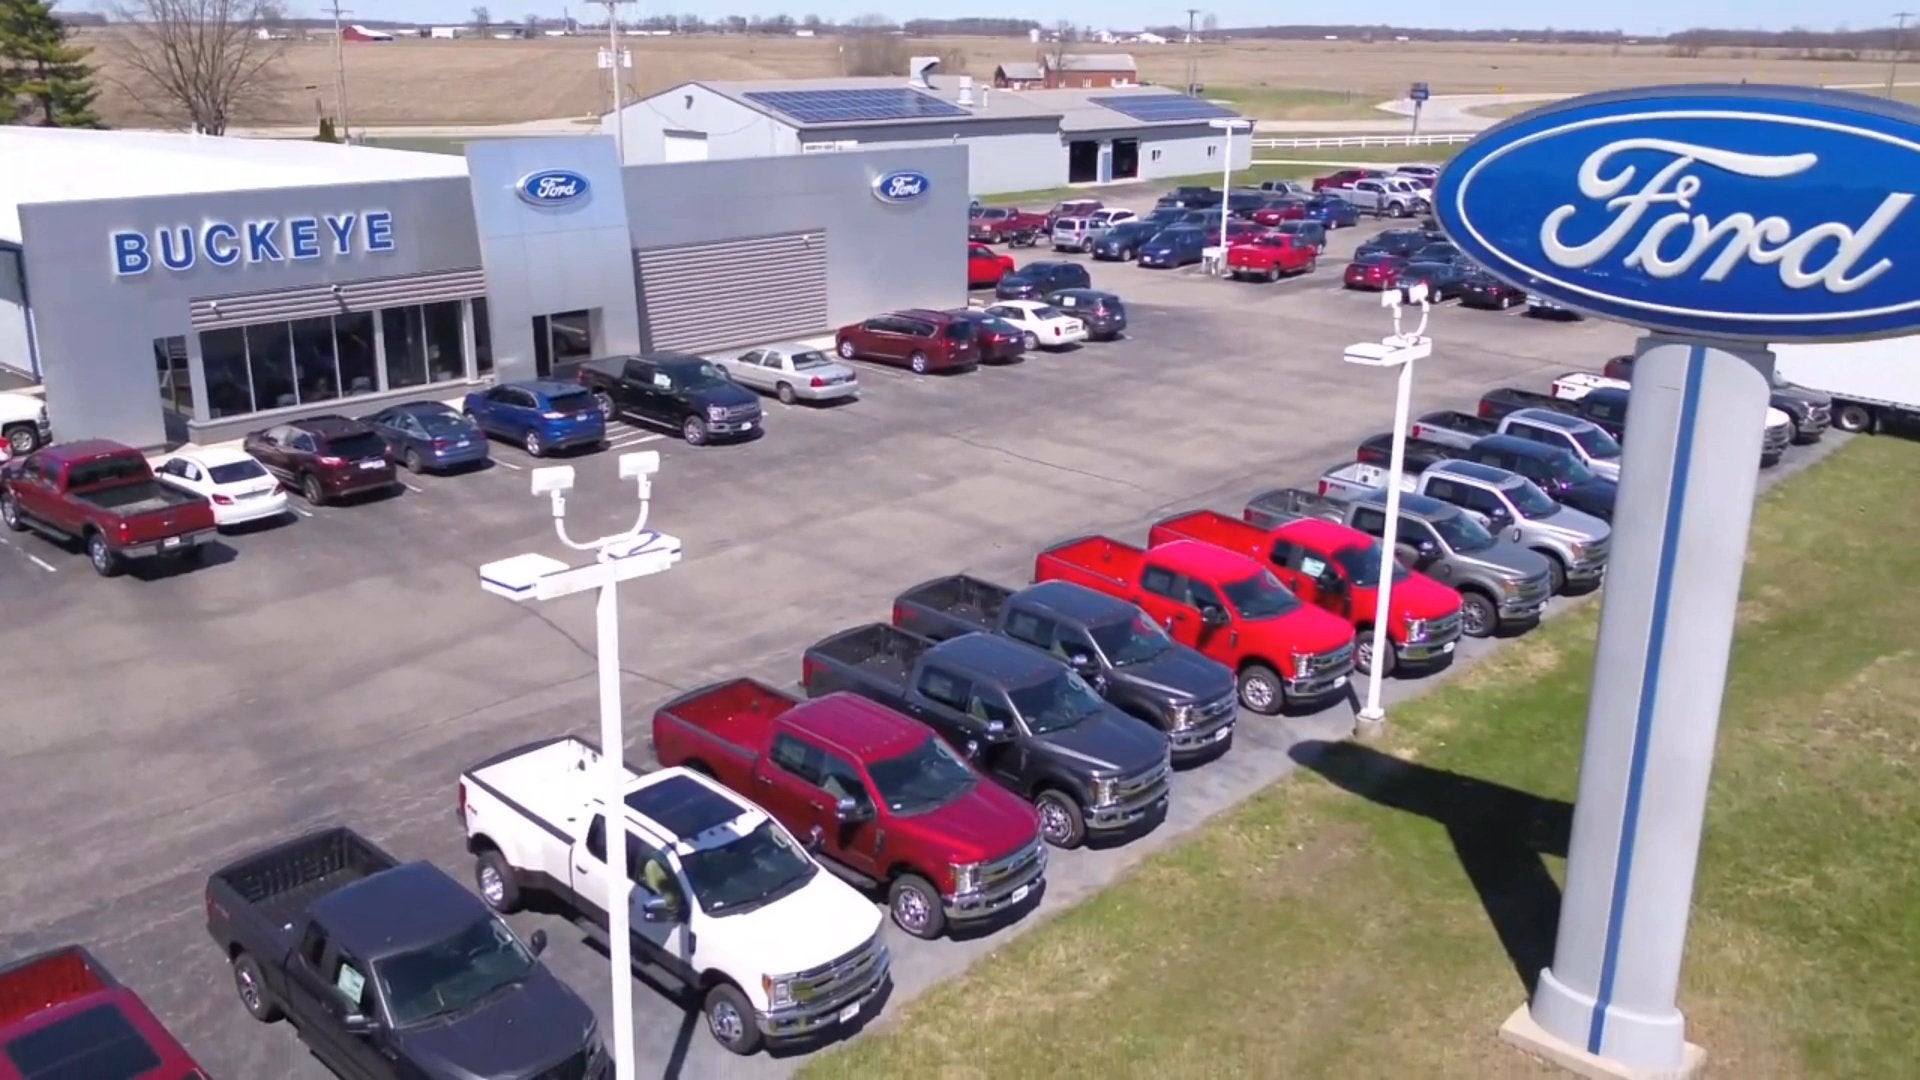 Image of Buckeye Ford's car lot from bird's-eye-view.